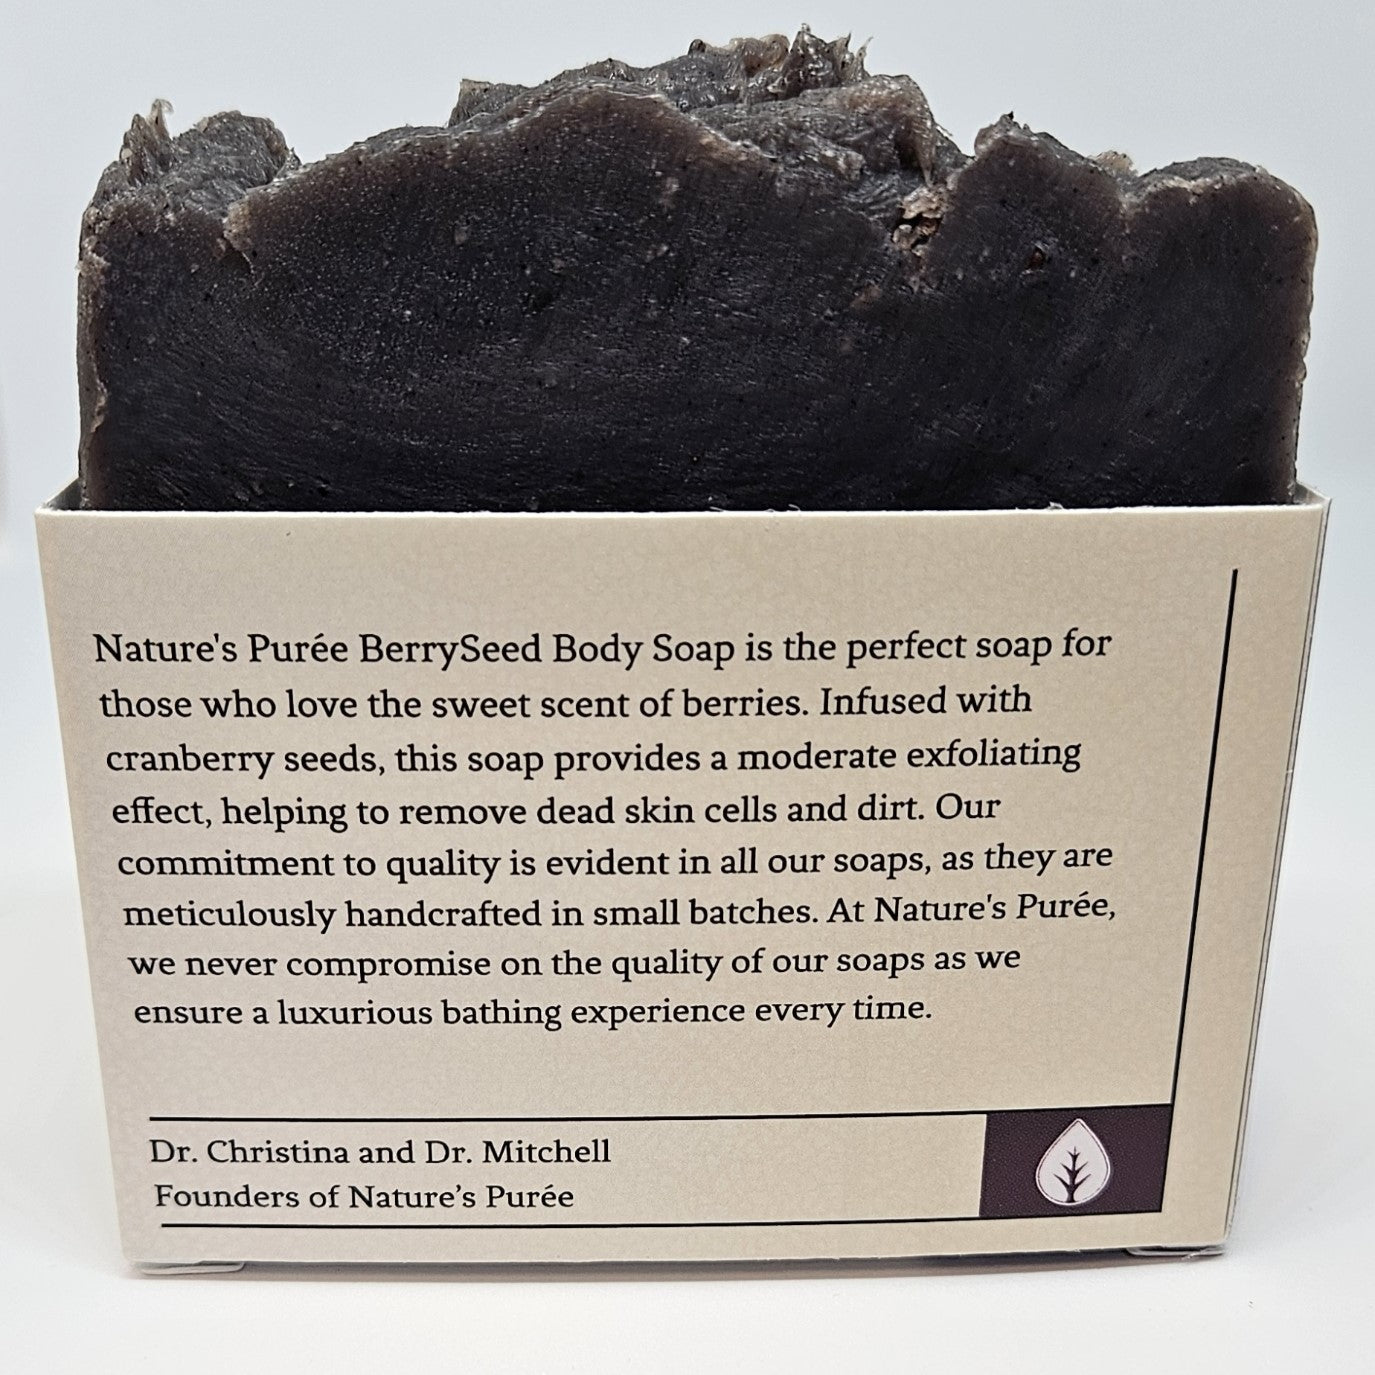 NATURE'S PURÉE BERRYSEED BODY SOAP